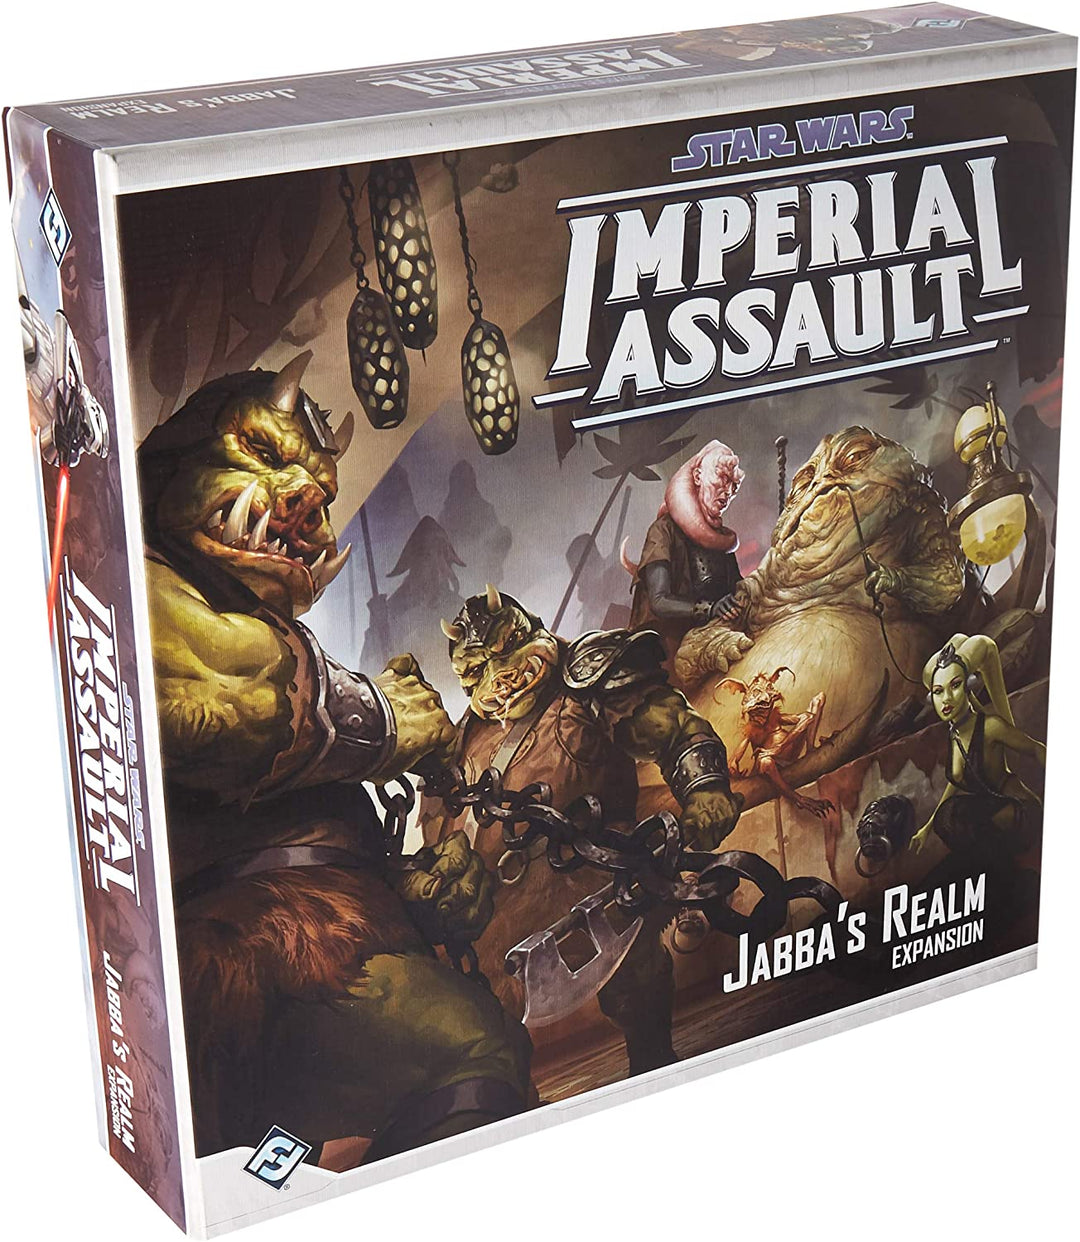 Star Wars: Imperial Assault Expansion Jabba's Realm Expansion